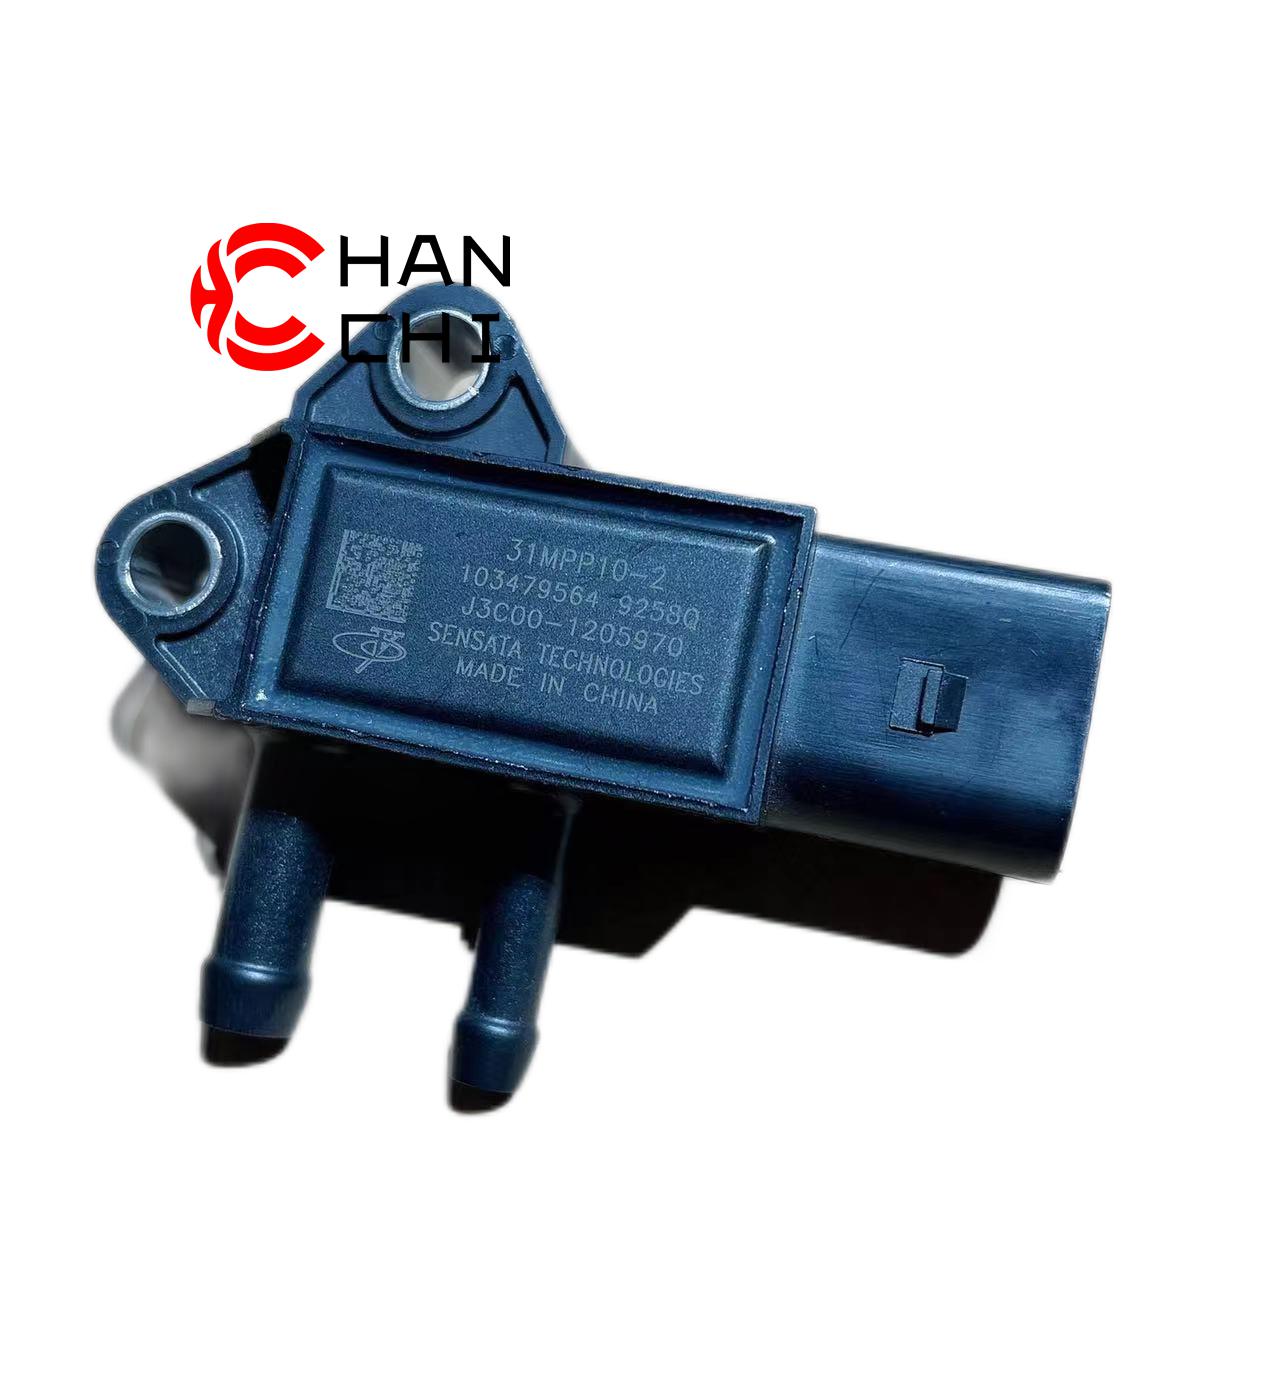 OEM: 31MPP10-2 103479564 J3C00-1205970Material: ABSColor: blackOrigin: Made in ChinaWeight: 100gPacking List: 1* Diesel Particulate Filter Differential Pressure Sensor More ServiceWe can provide OEM Manufacturing serviceWe can Be your one-step solution for Auto PartsWe can provide technical scheme for you Feel Free to Contact Us, We will get back to you as soon as possible.